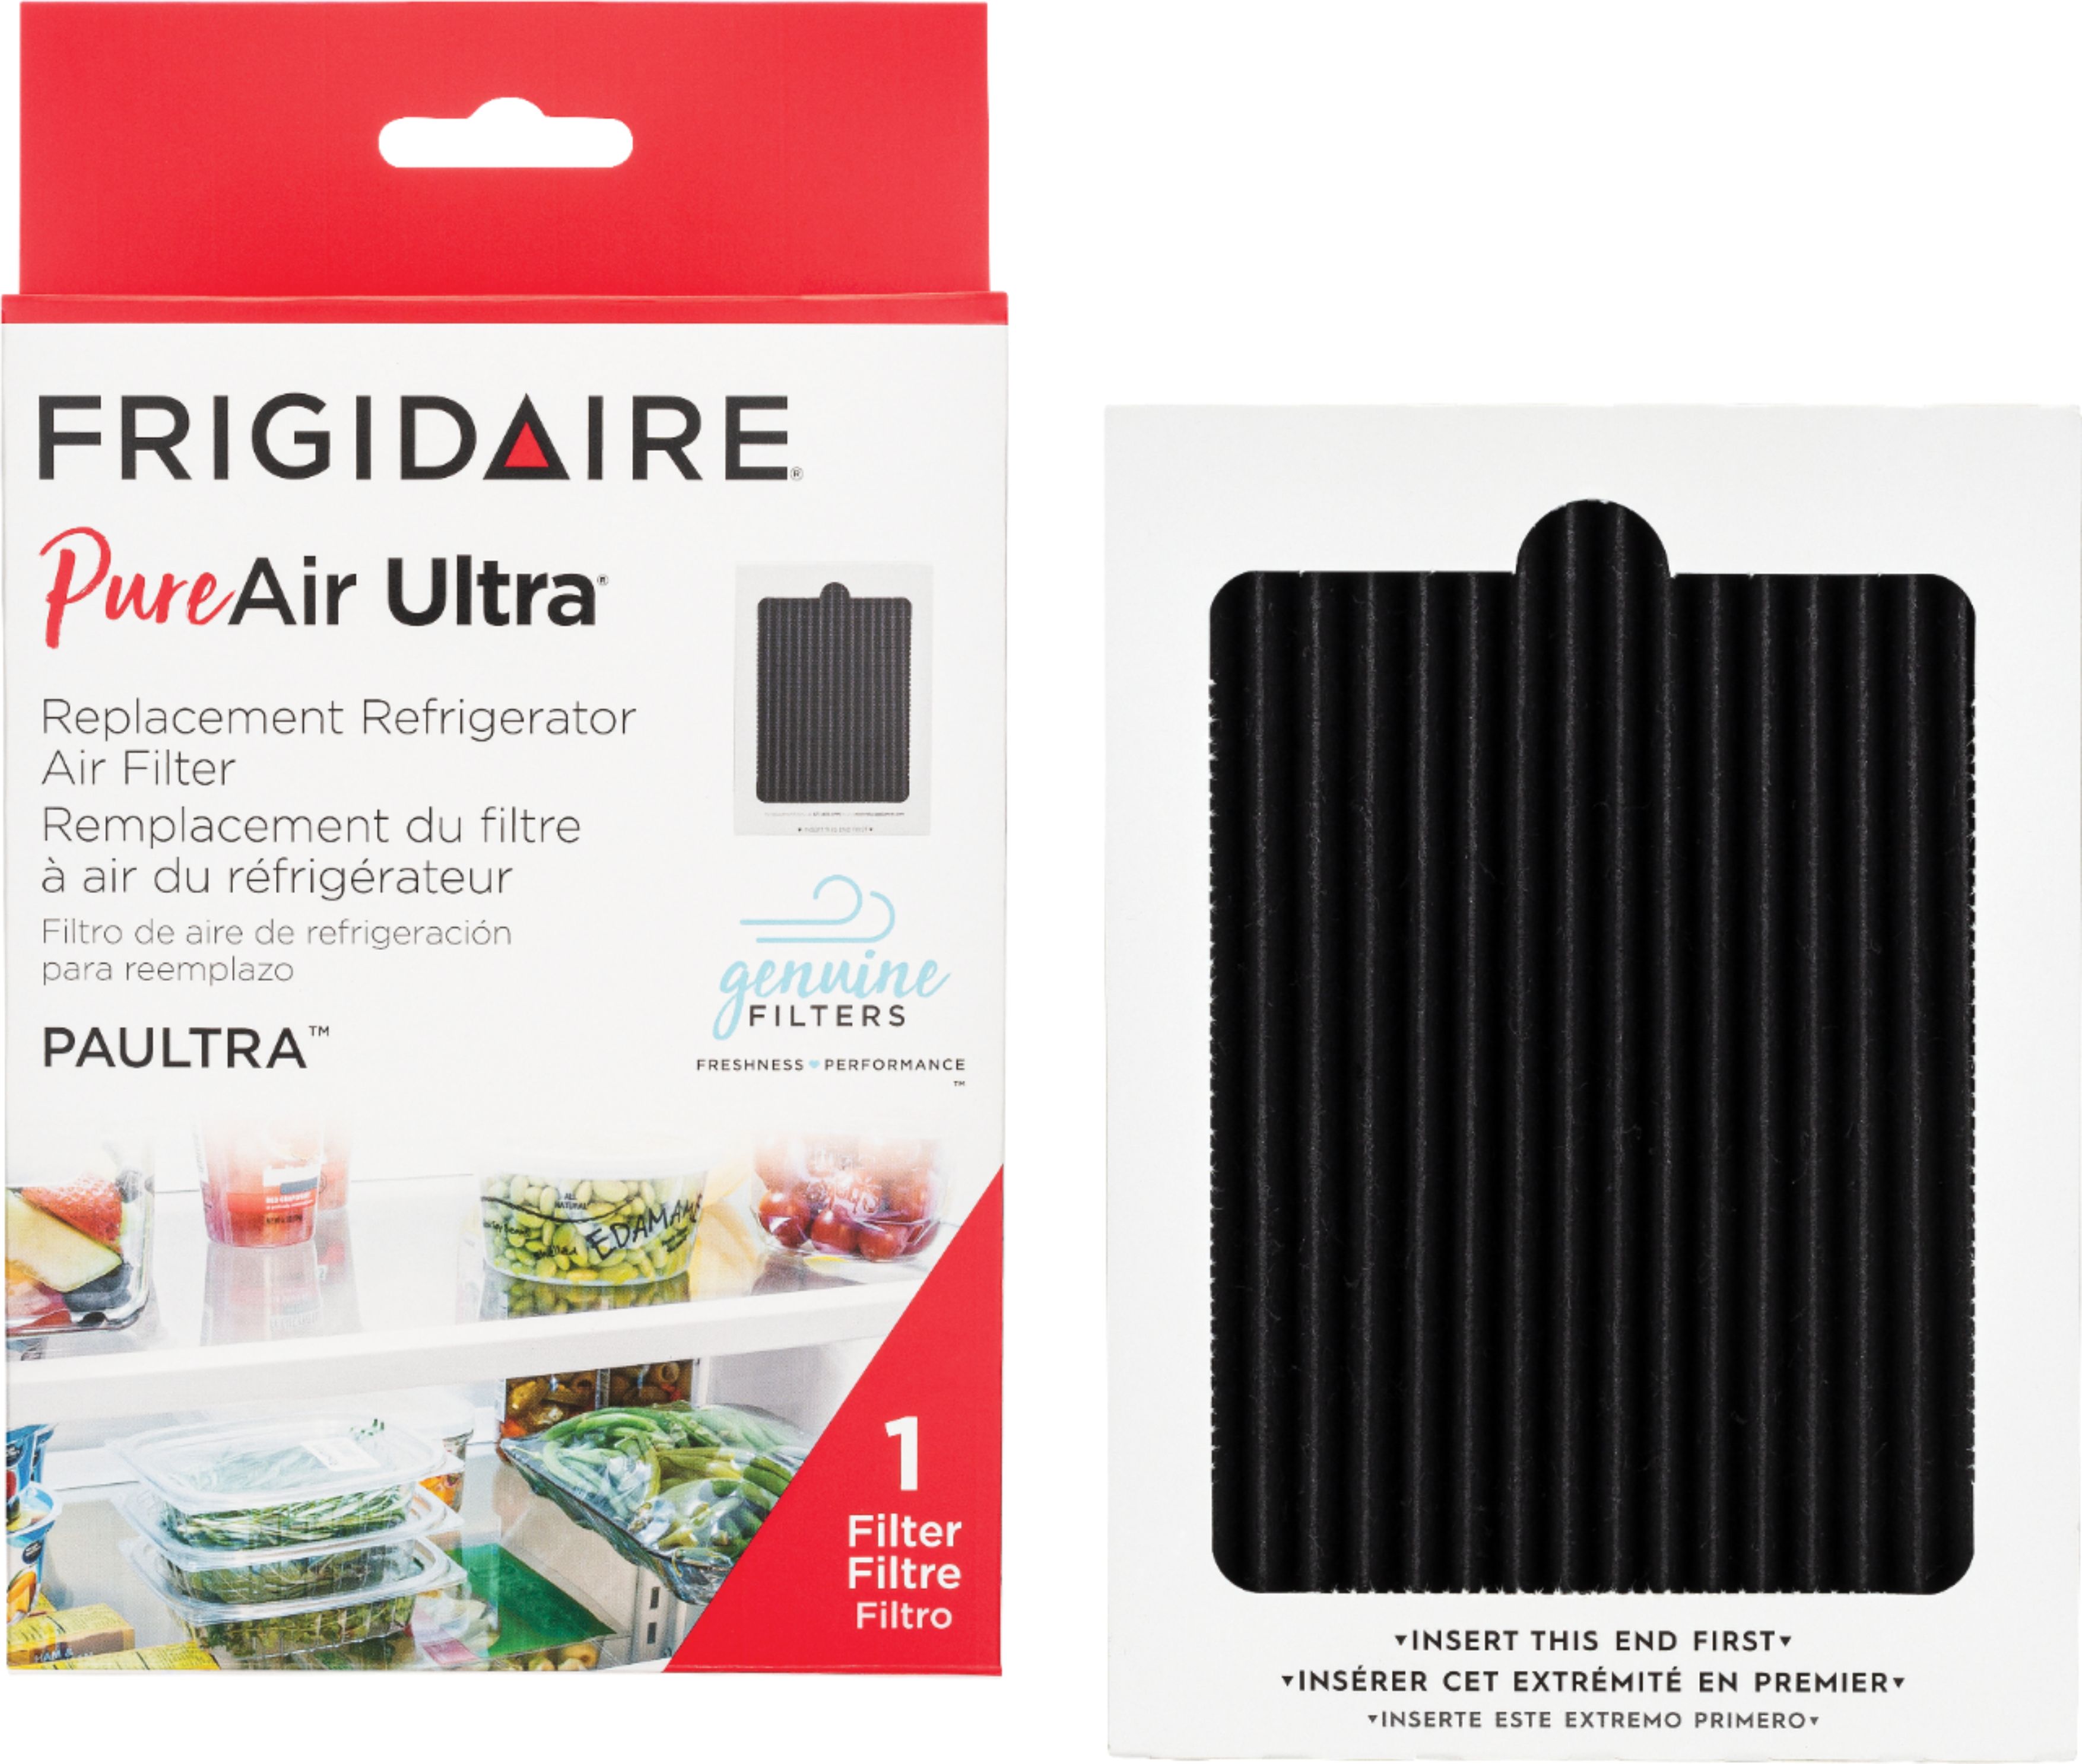 Replacement Filter for Frigidaire Pure Air Ultra Refrigerator Also Fits Electrolux Part # EAFCBF PAULTRA 242061001 241754001 By LifeSupplyUSA